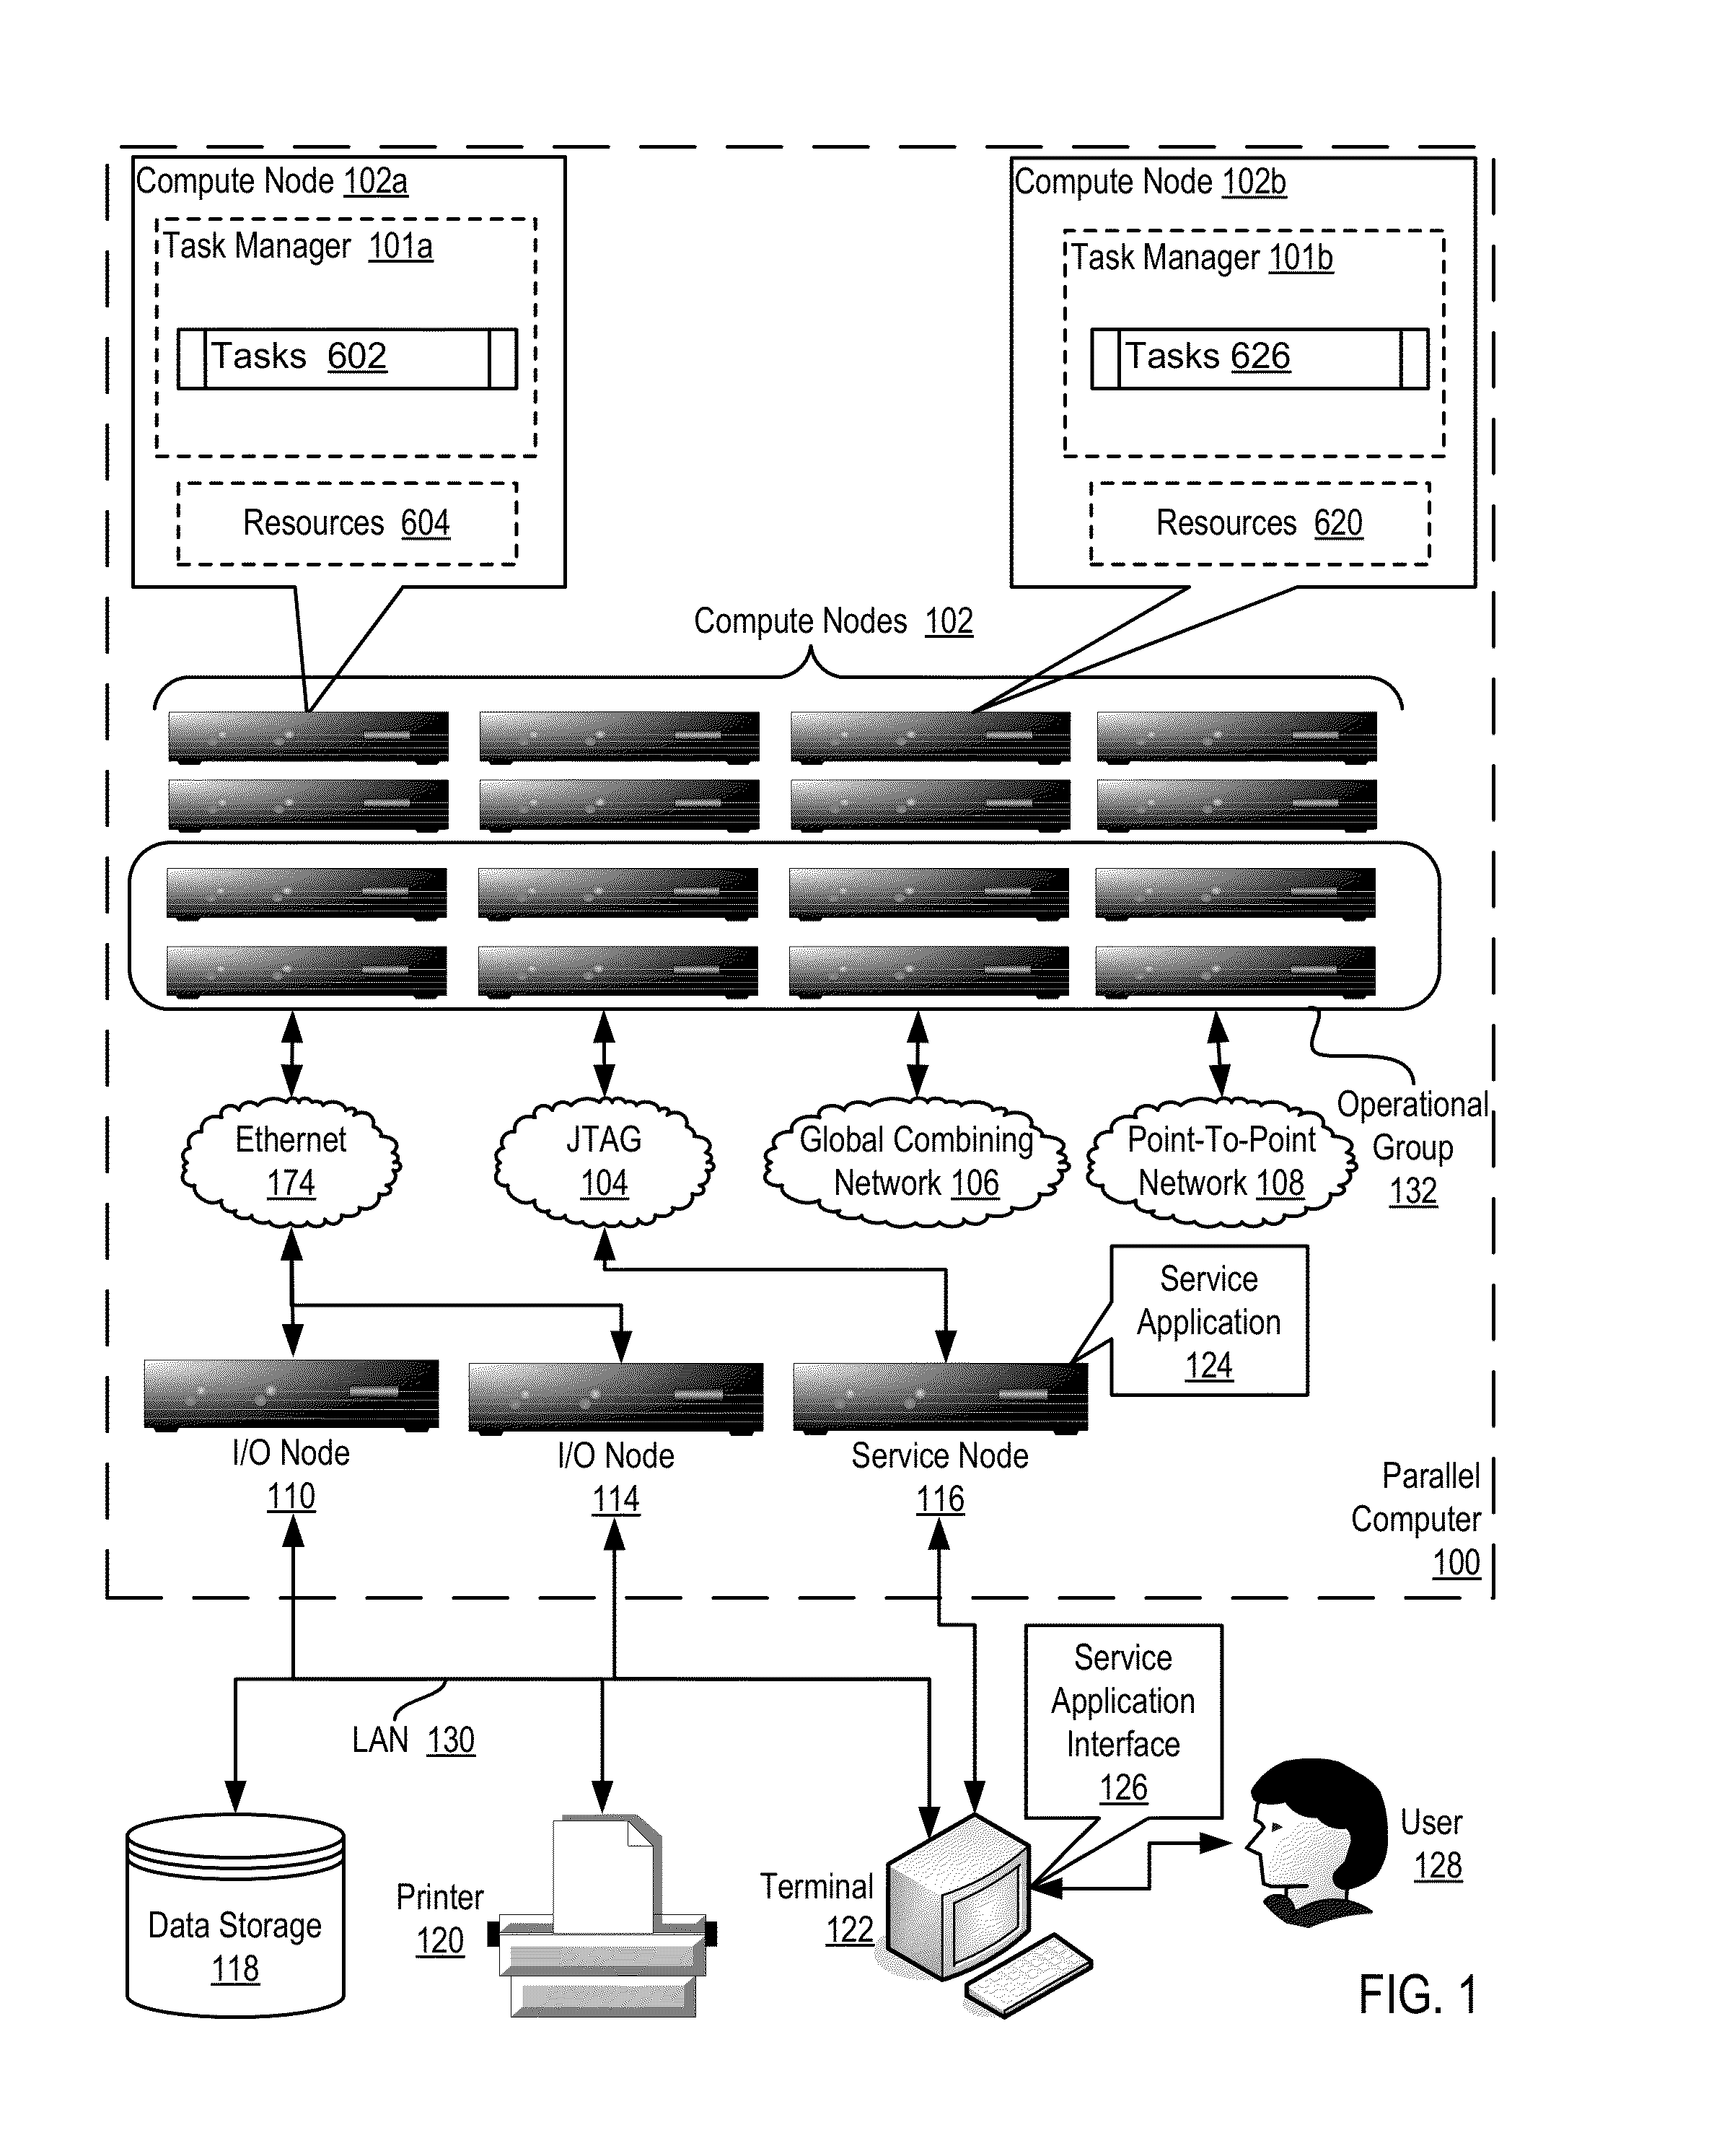 Topology mapping in a distributed processing system